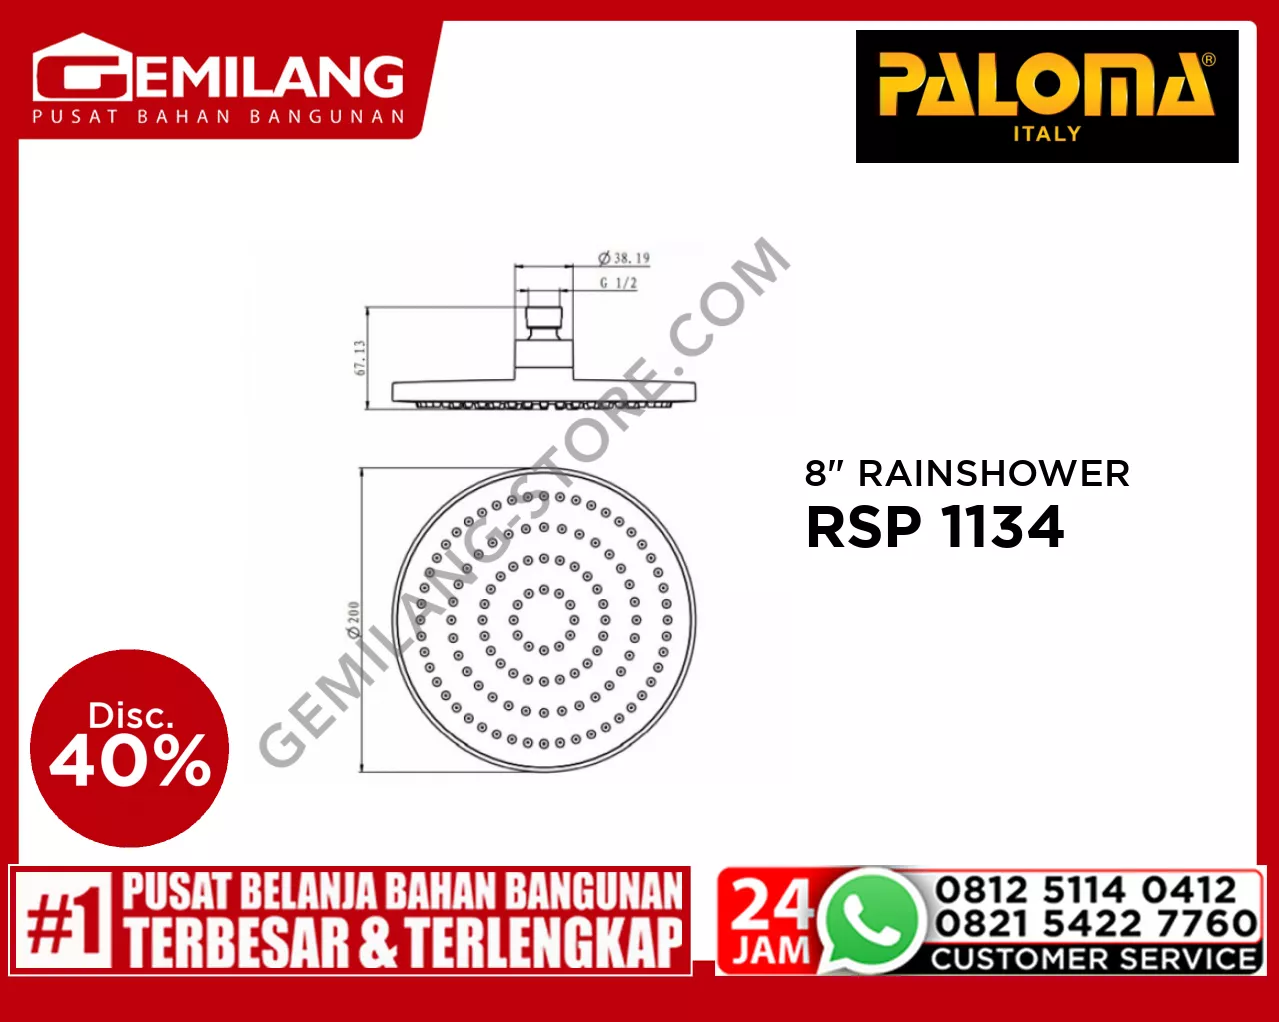 PALOMA 8inch RAINSHOWER AIR-INJECTION ROUND CHROME RSP 1134